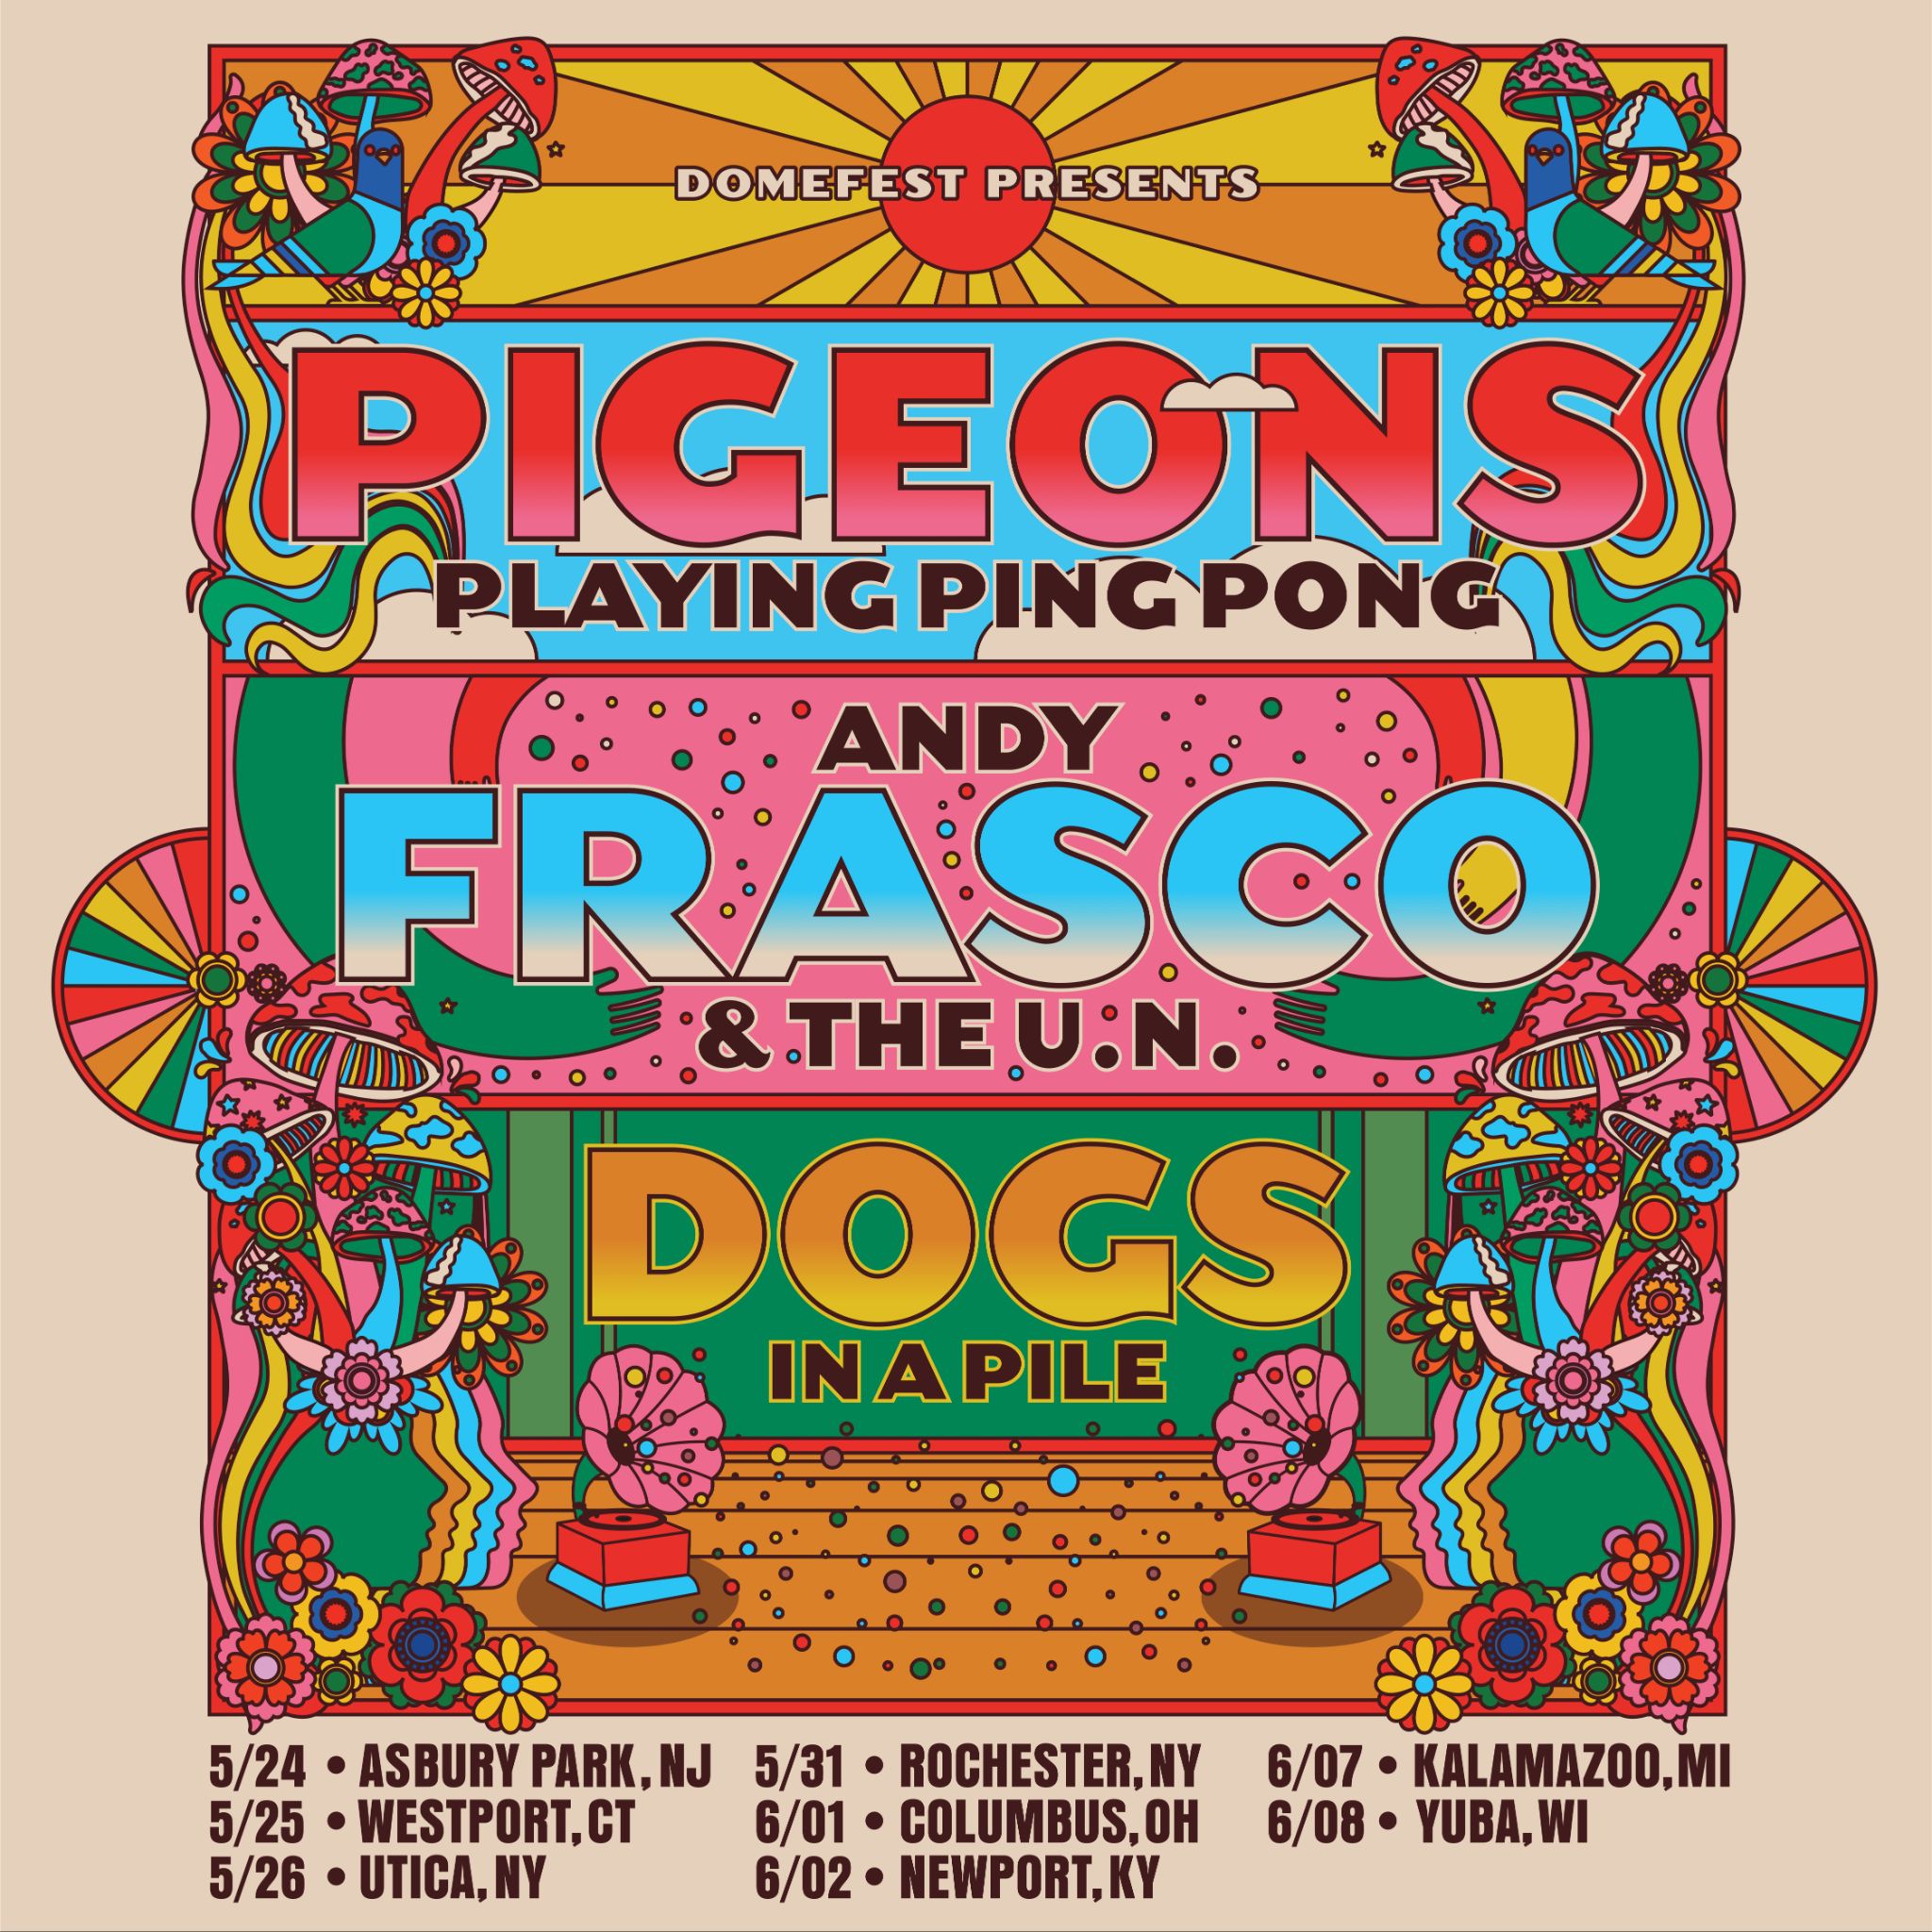 Pigeons Playing Ping Pong, Andy Frasco & The U.N., and Dogs in a Pile Announce Joint "Pigeons Frasco Dogs Tour"